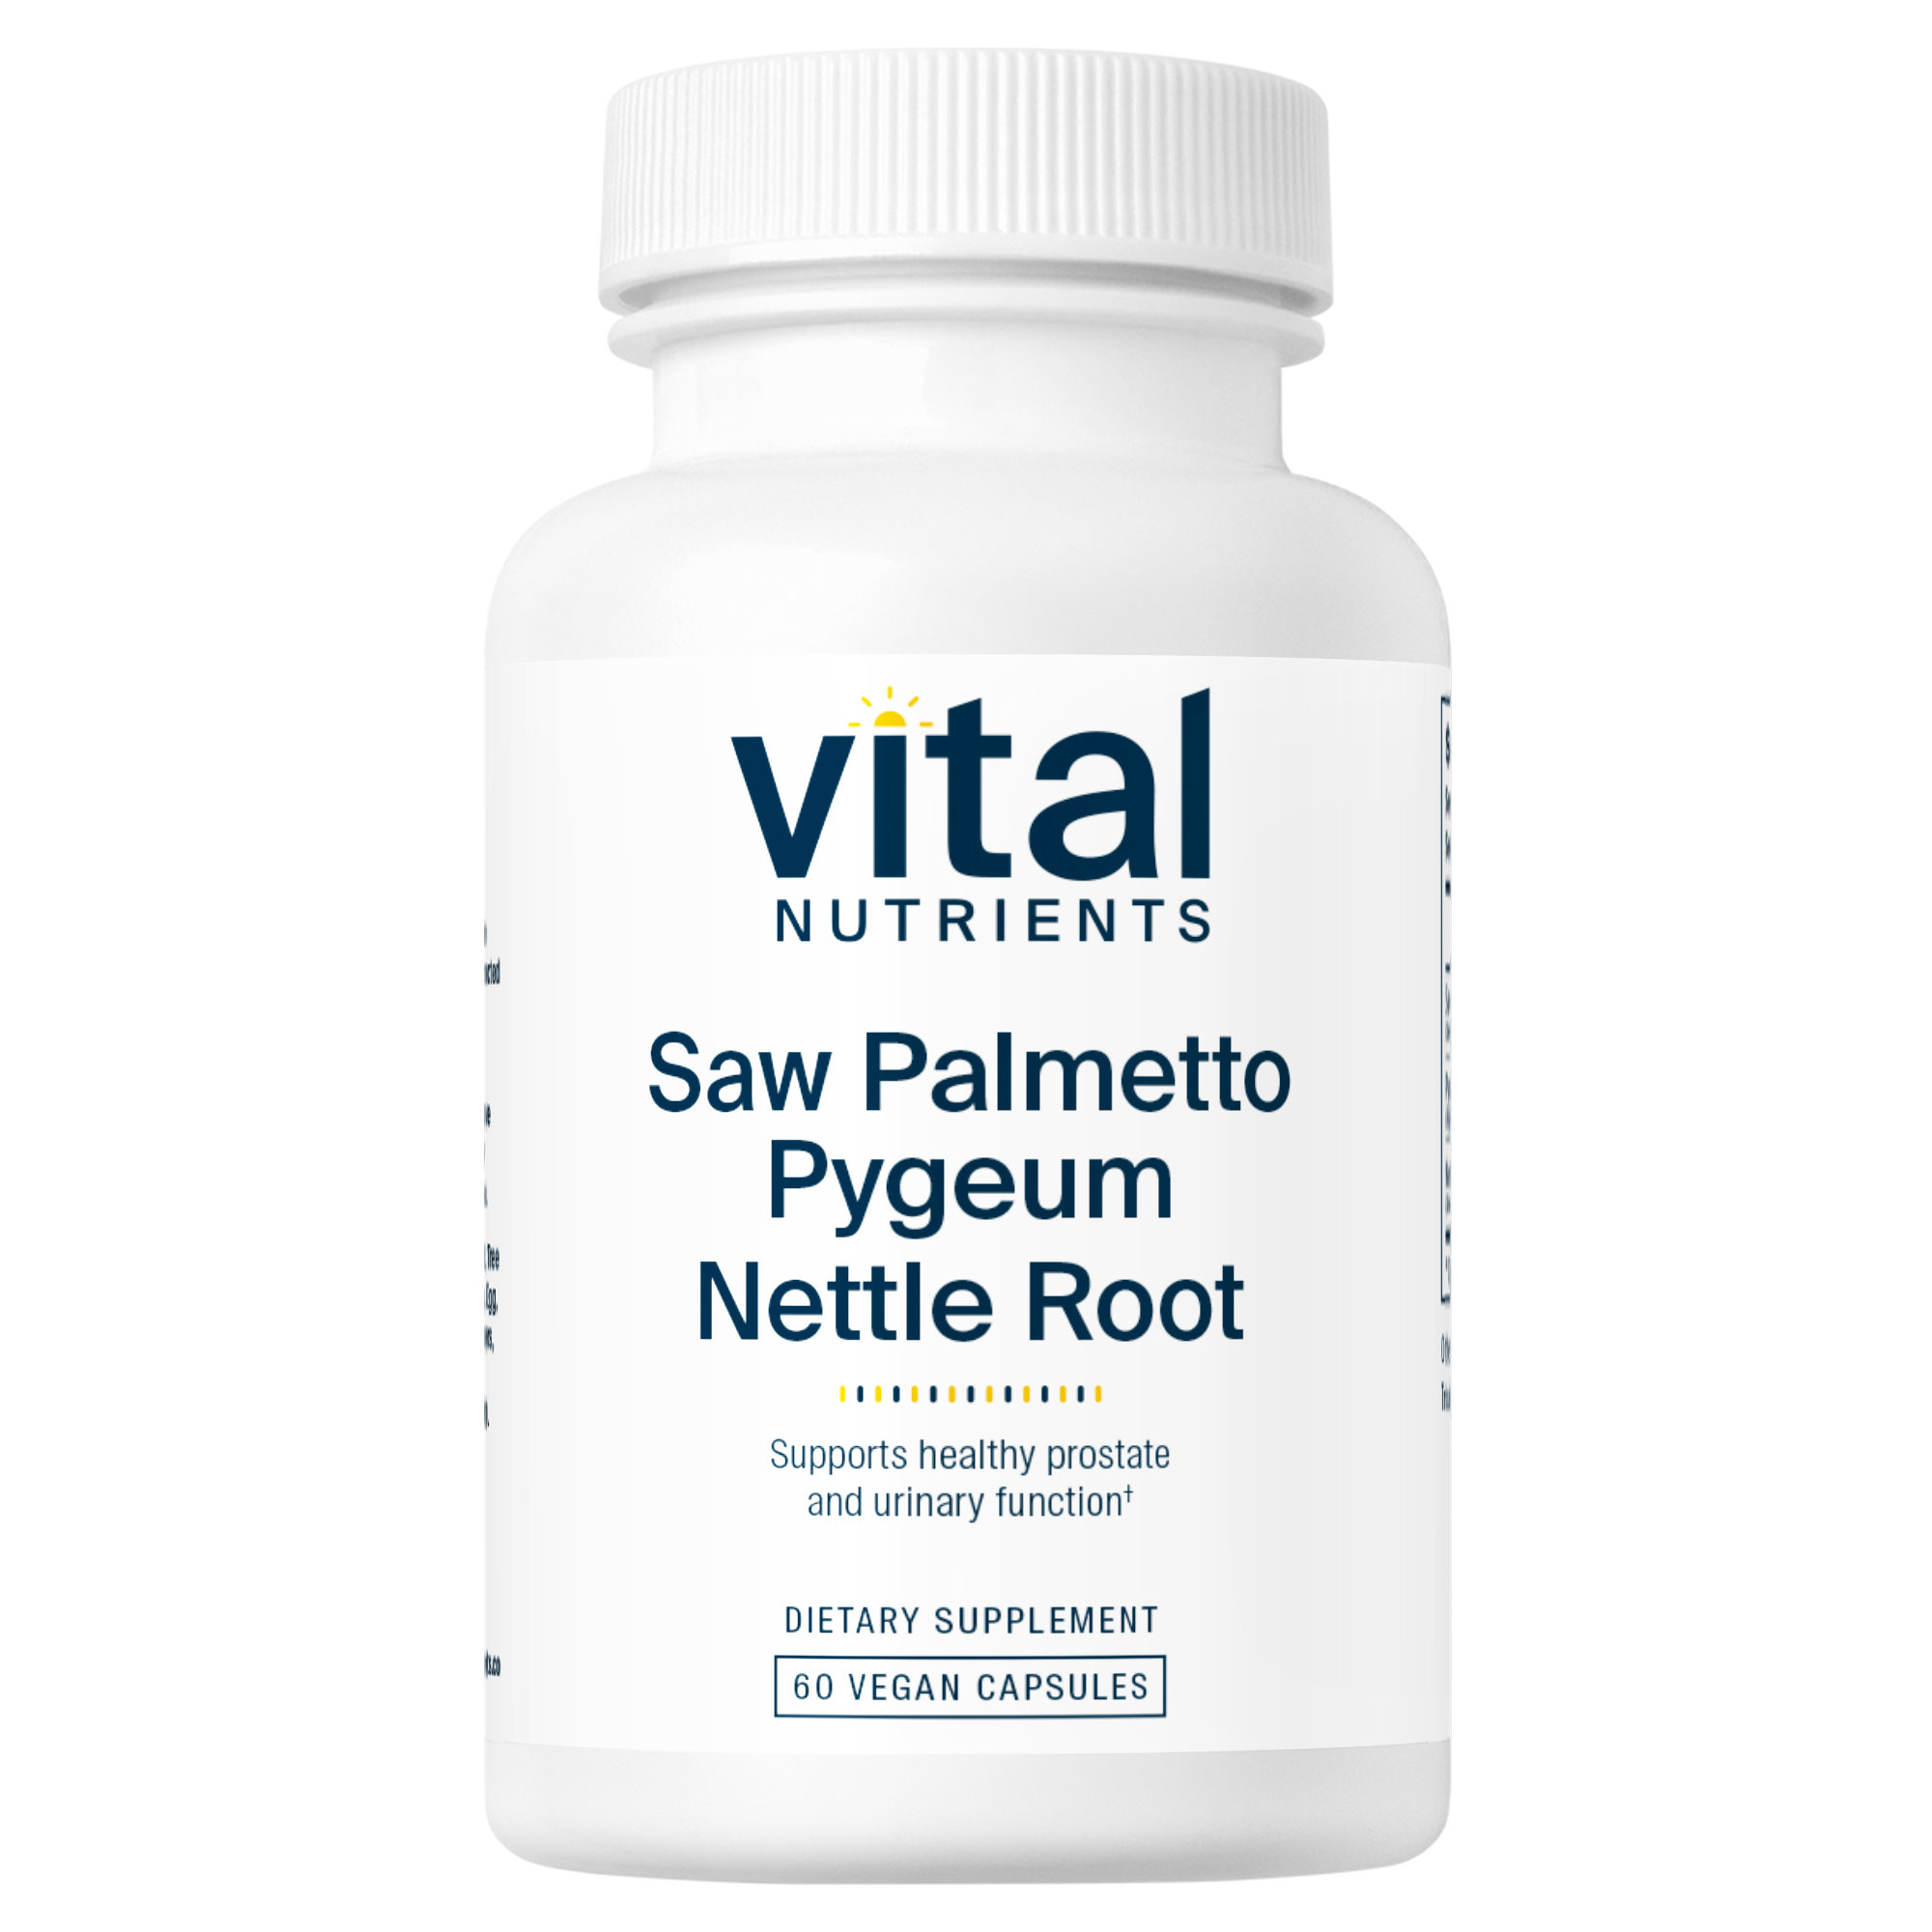 Saw Palmetto/Pygeum/Nettle Root - 60 Capsules | Vital Nutrients